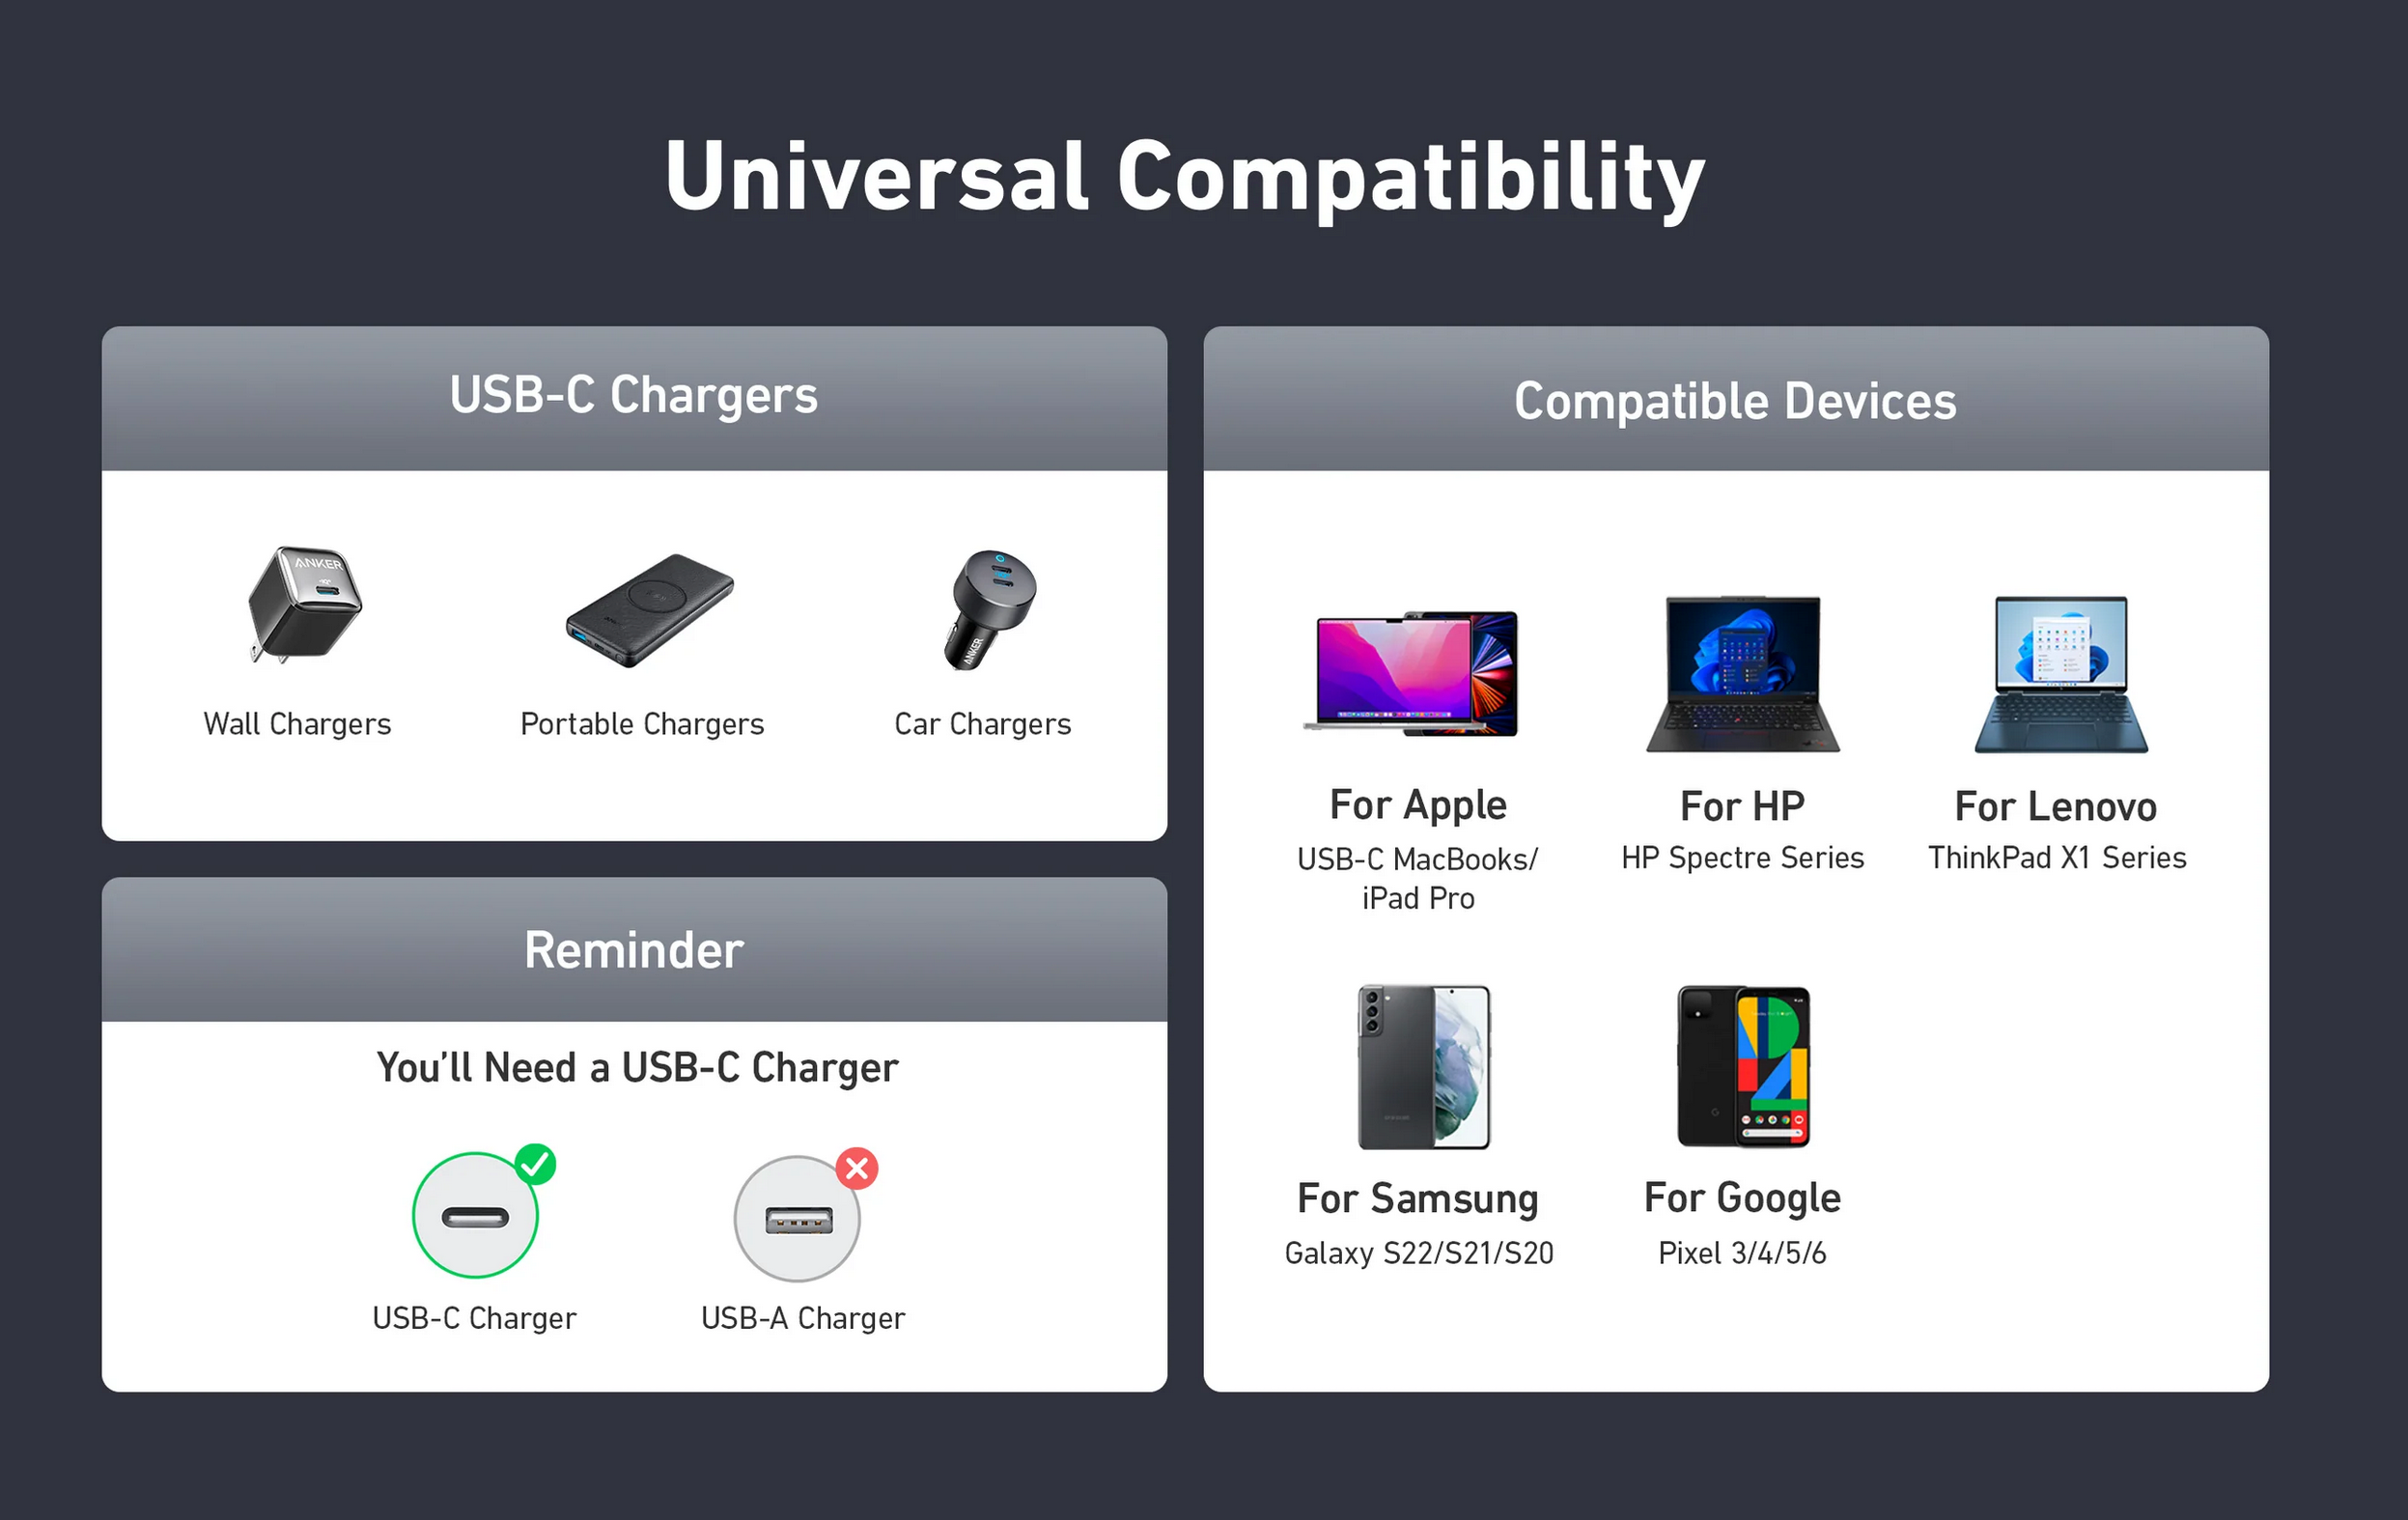 Anker Universal Compatibility section includes products under USB-C Chargers, Compatible devices, and Reminder to get a USBC charger not a USBA charger.